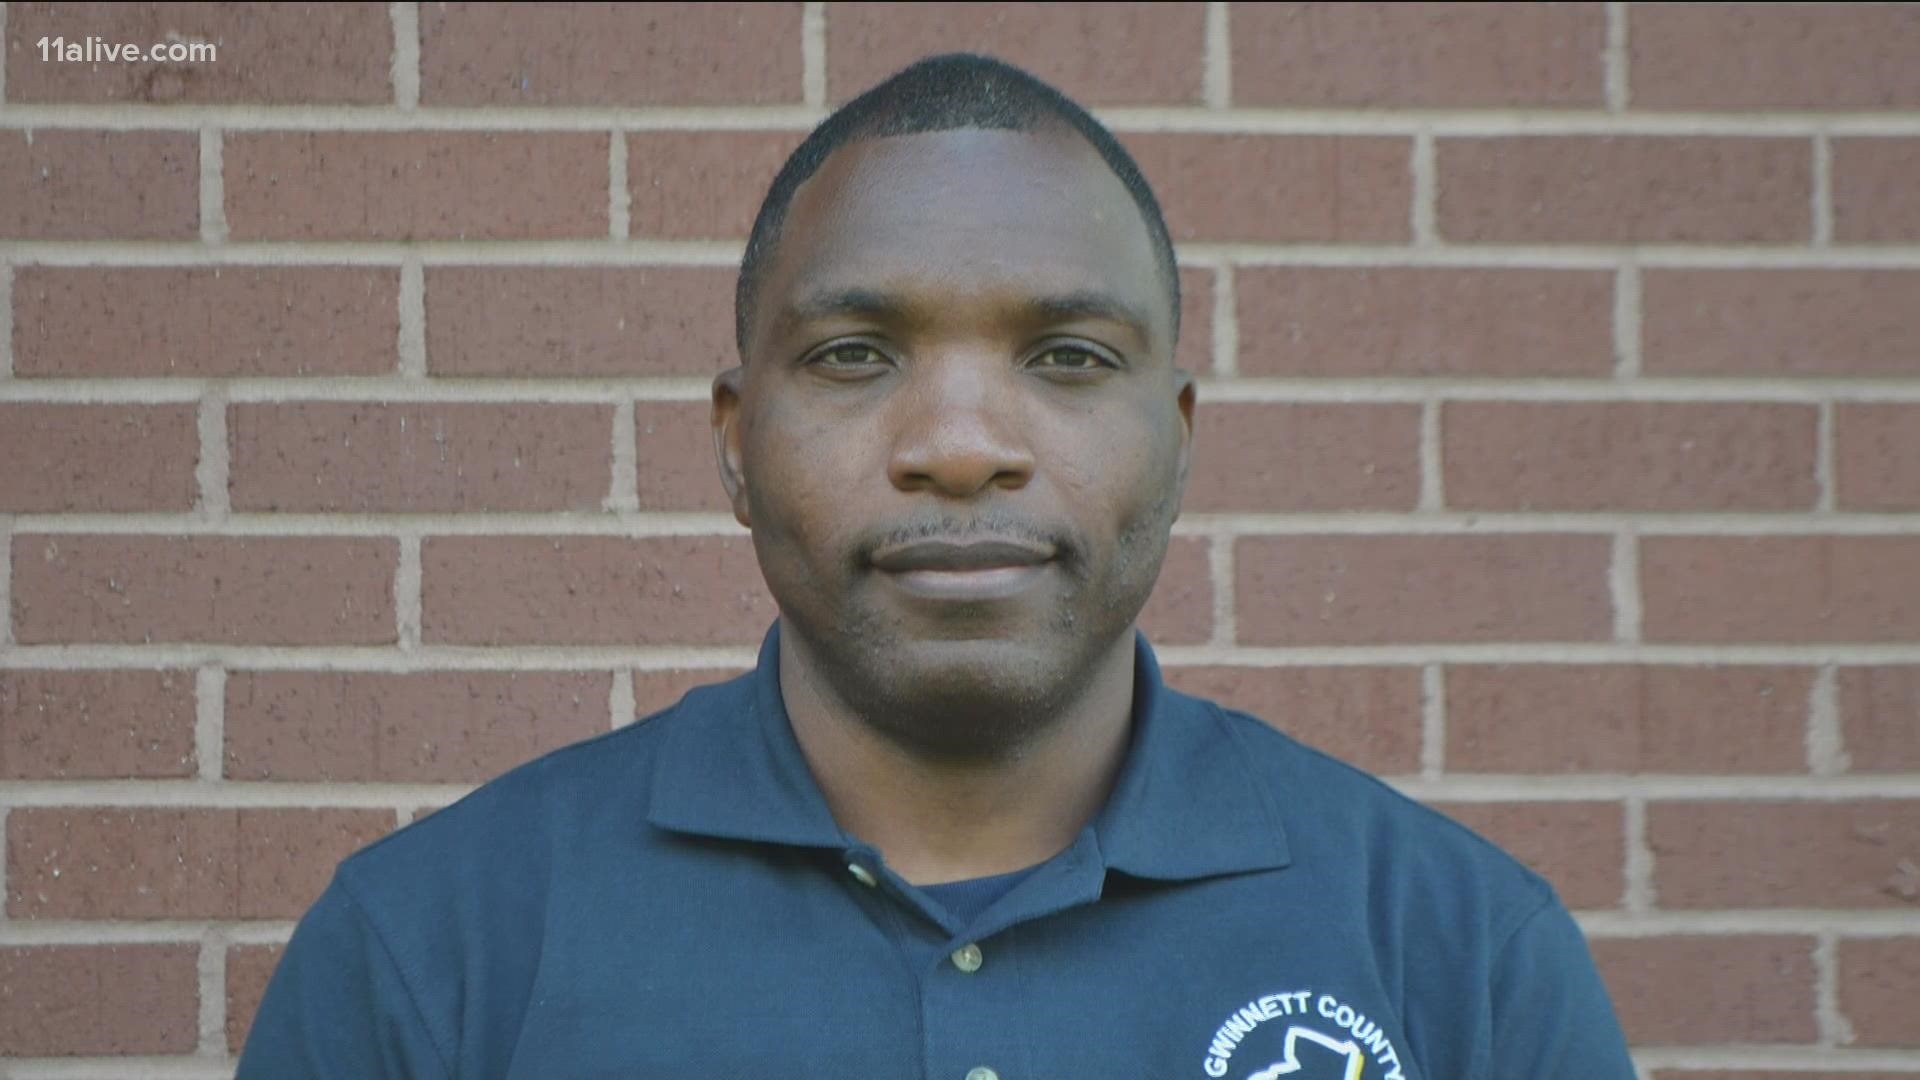 The Gwinnett County Police Department said Ronald Donat was part of the 112th training academy.